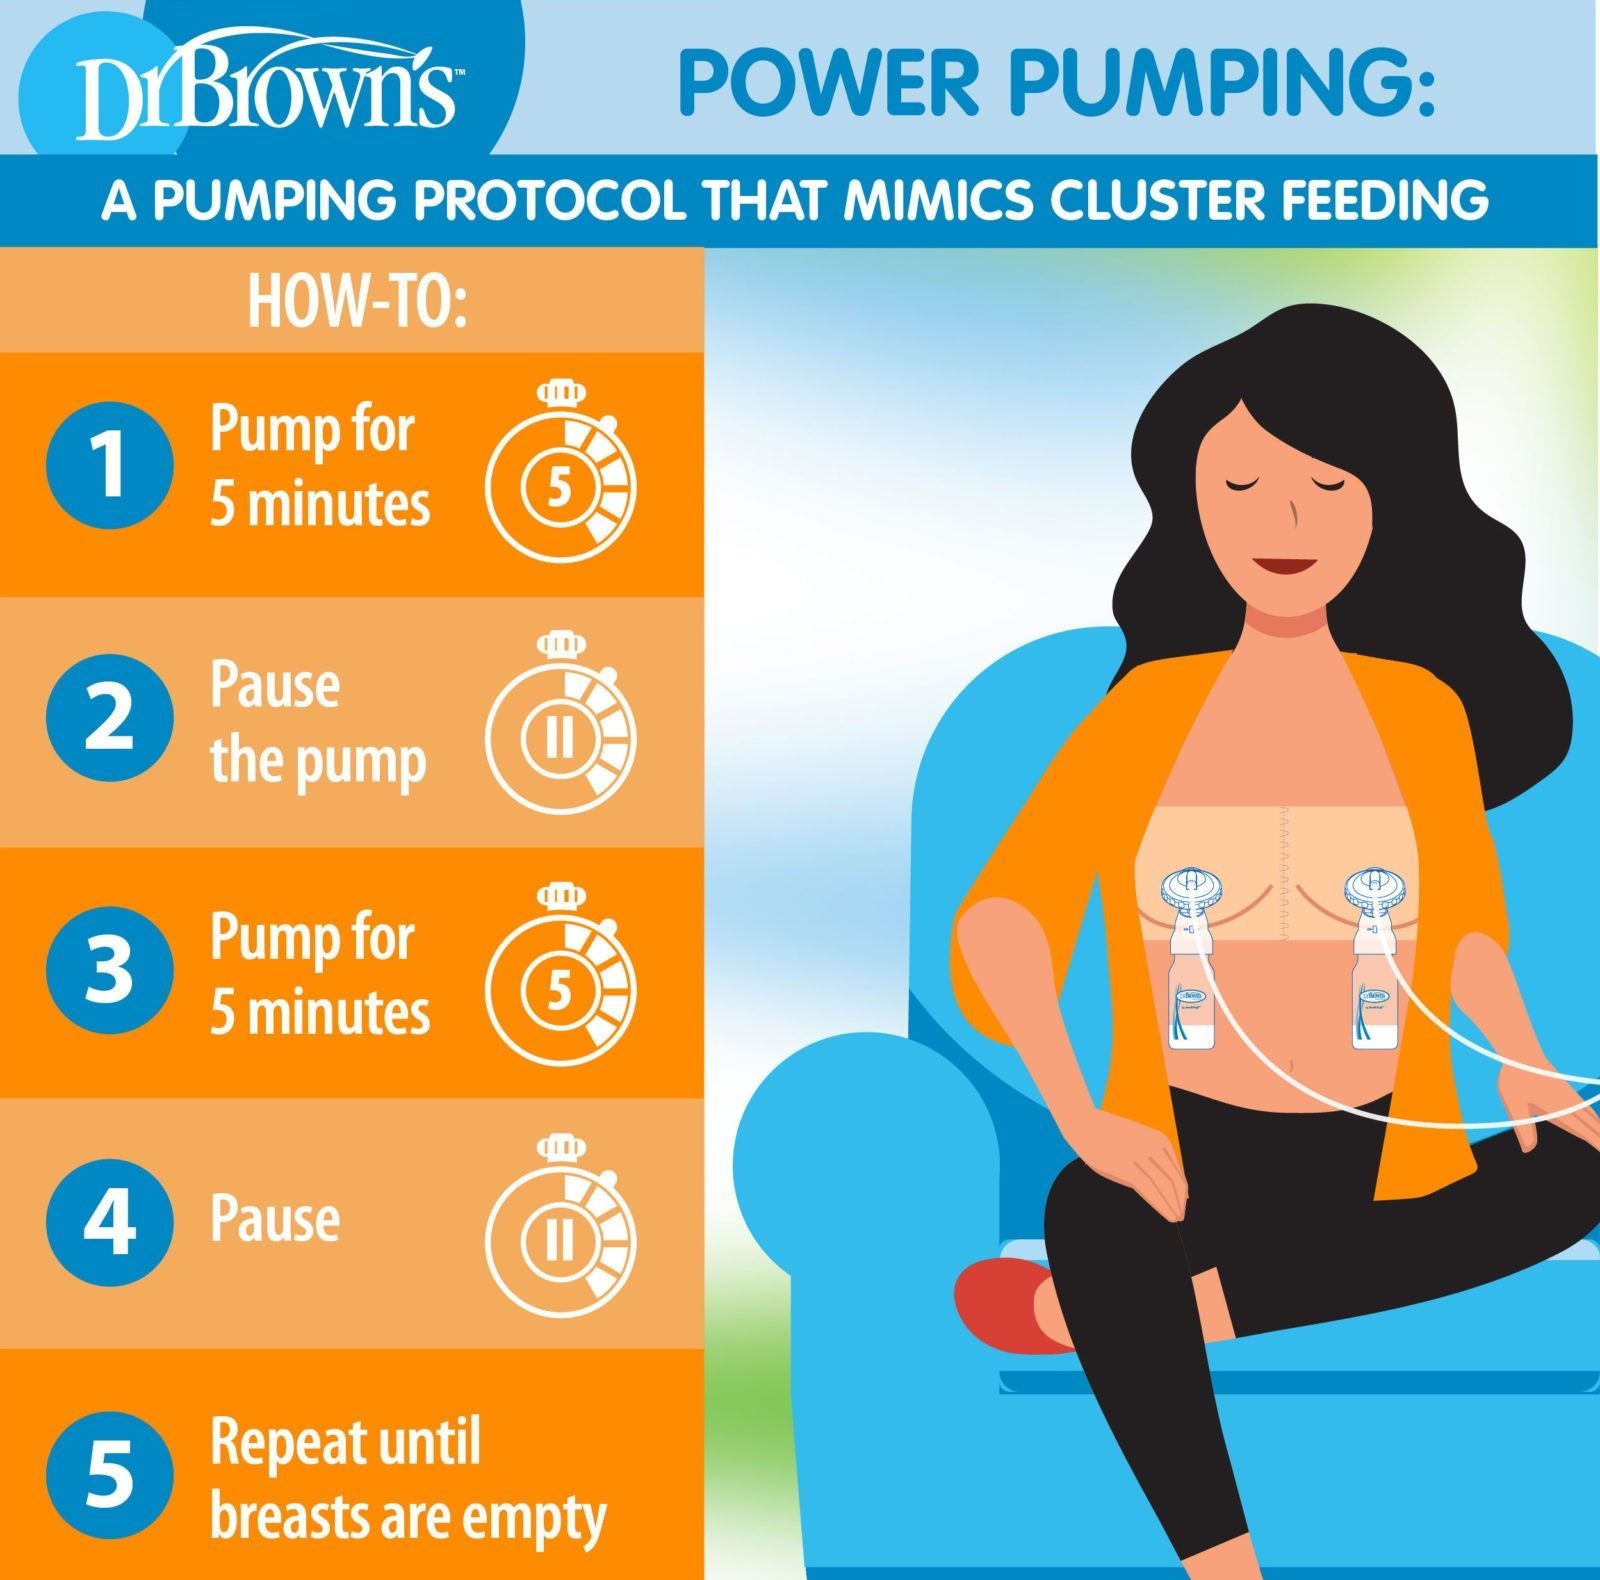 How to power pump